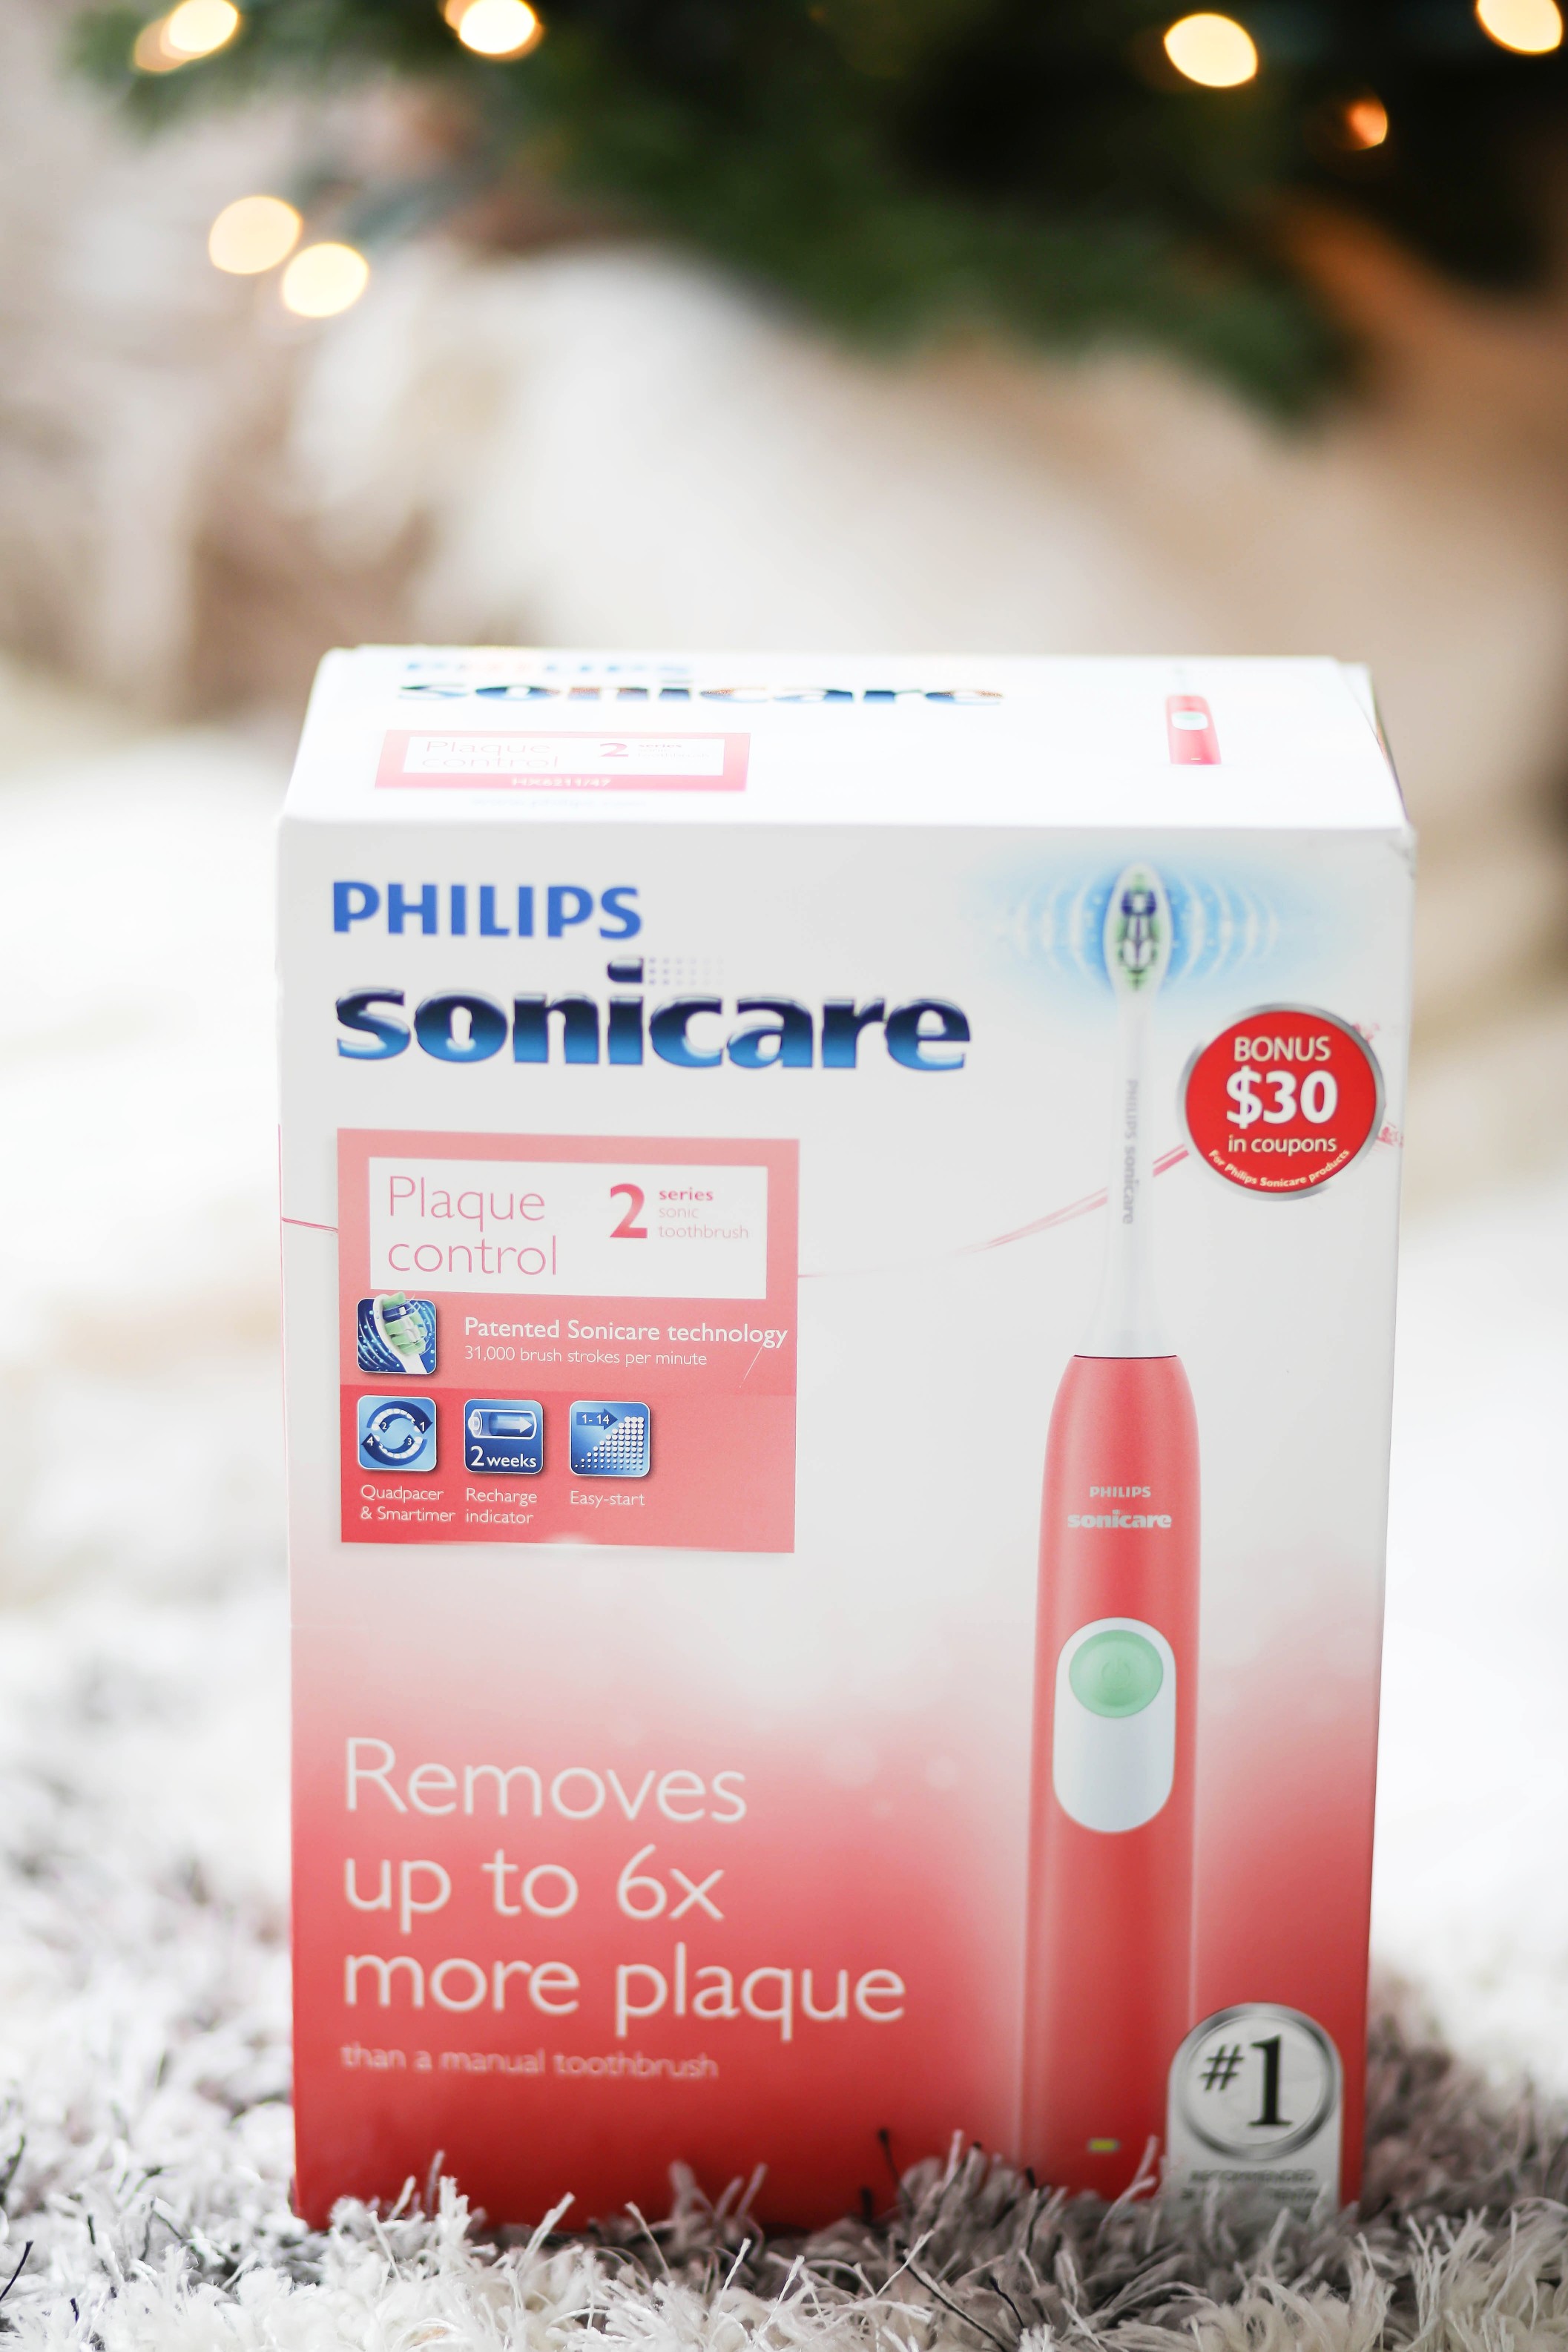 Philips Sonicare ($10 Rebate Available) 2 Series plaque control rechargeable electric toothbrush, Coral, HX6211/47 WHAT I GOT FOR CHRISTMAS 2017